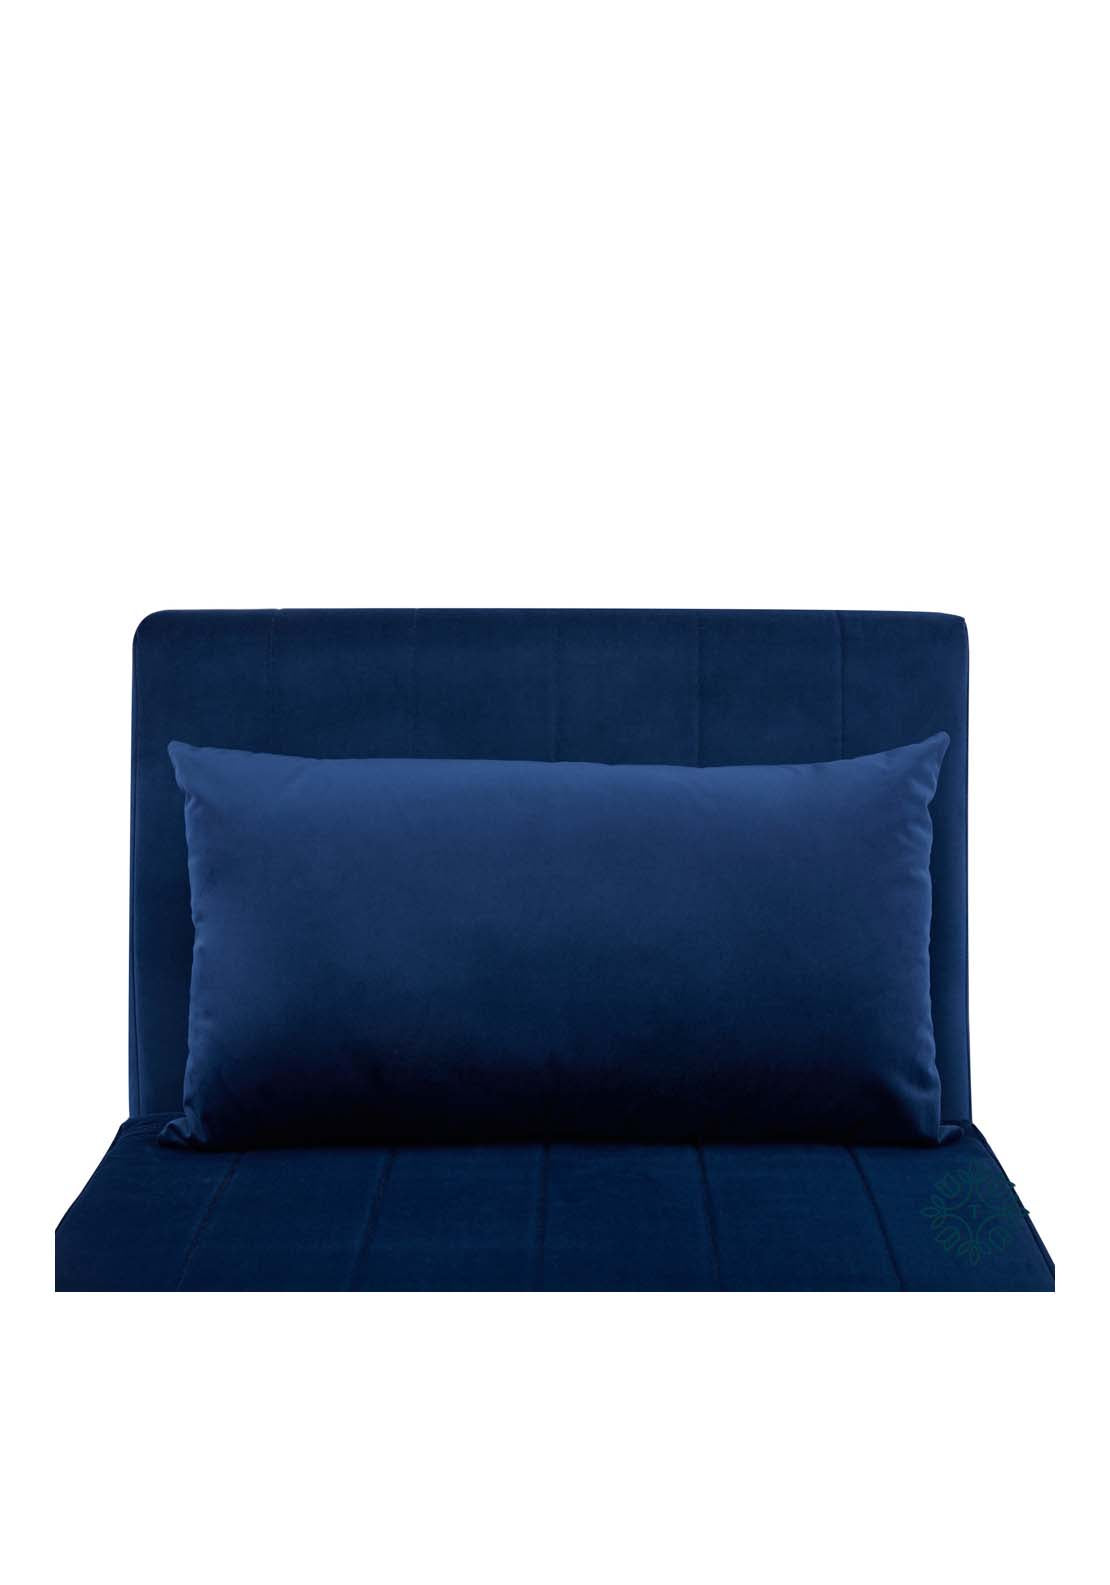 The Home Collection Bessie Single Sofa Bed - Blue 7 Shaws Department Stores